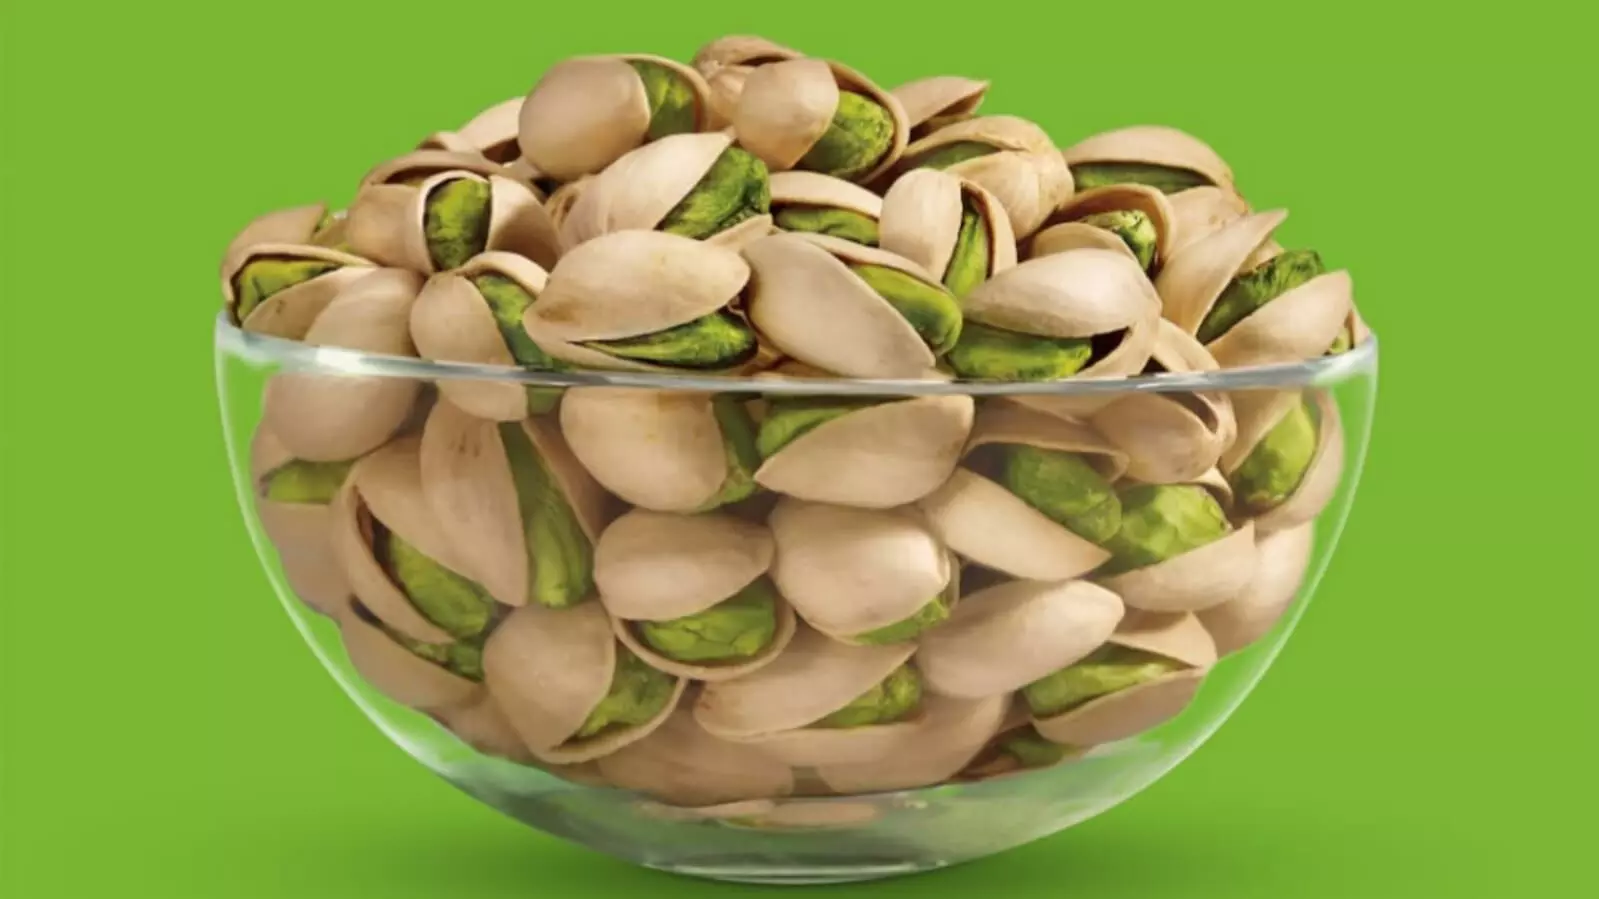 Celebrate World Pistachio Day, National Snacking Day with California pistachios